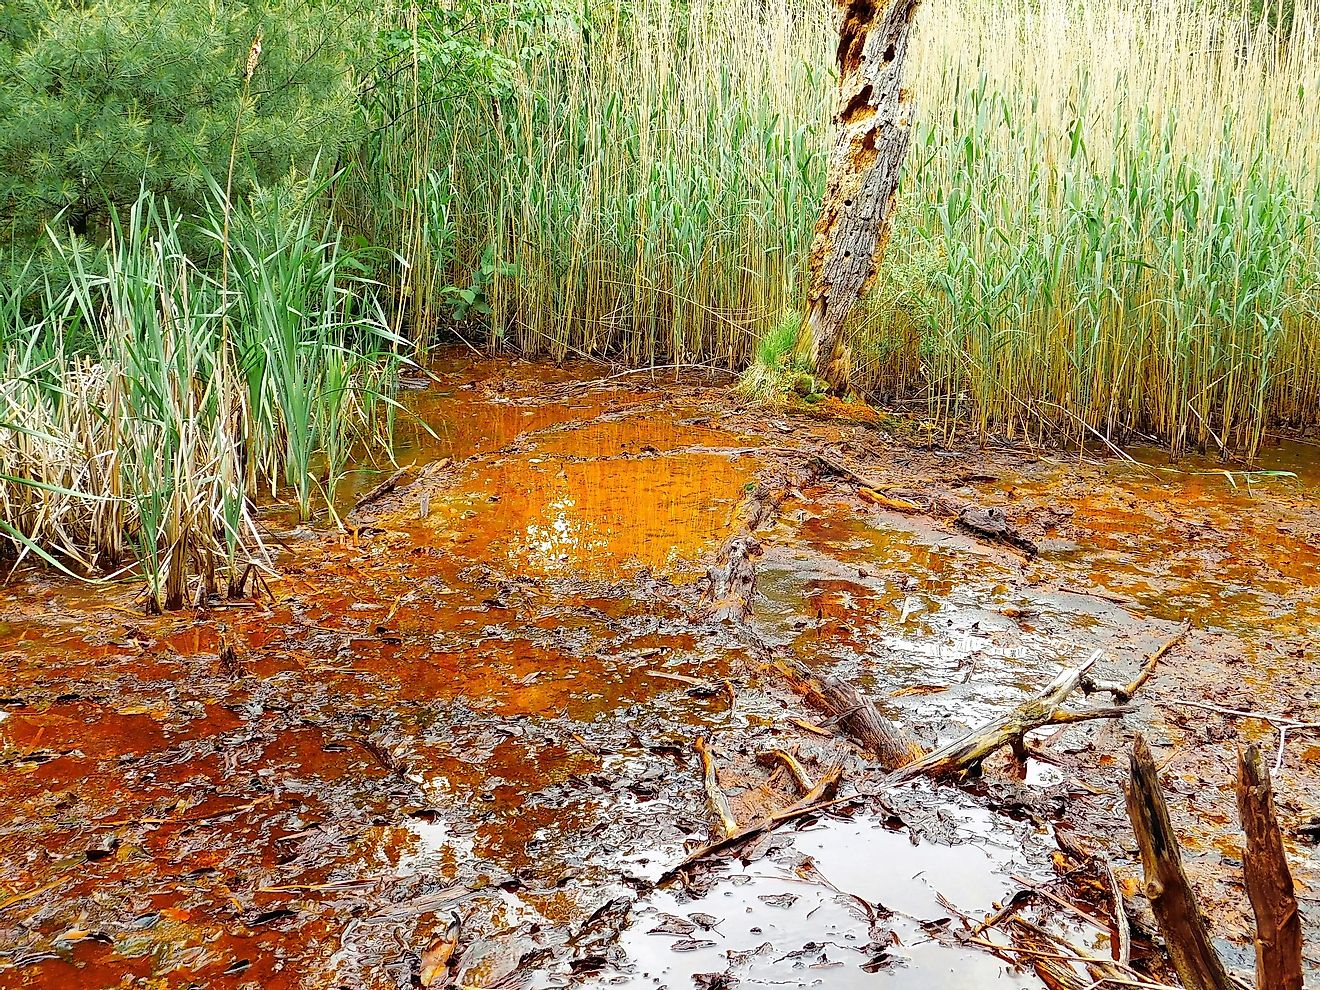 The water gets badly polluted by acid mine drainage.